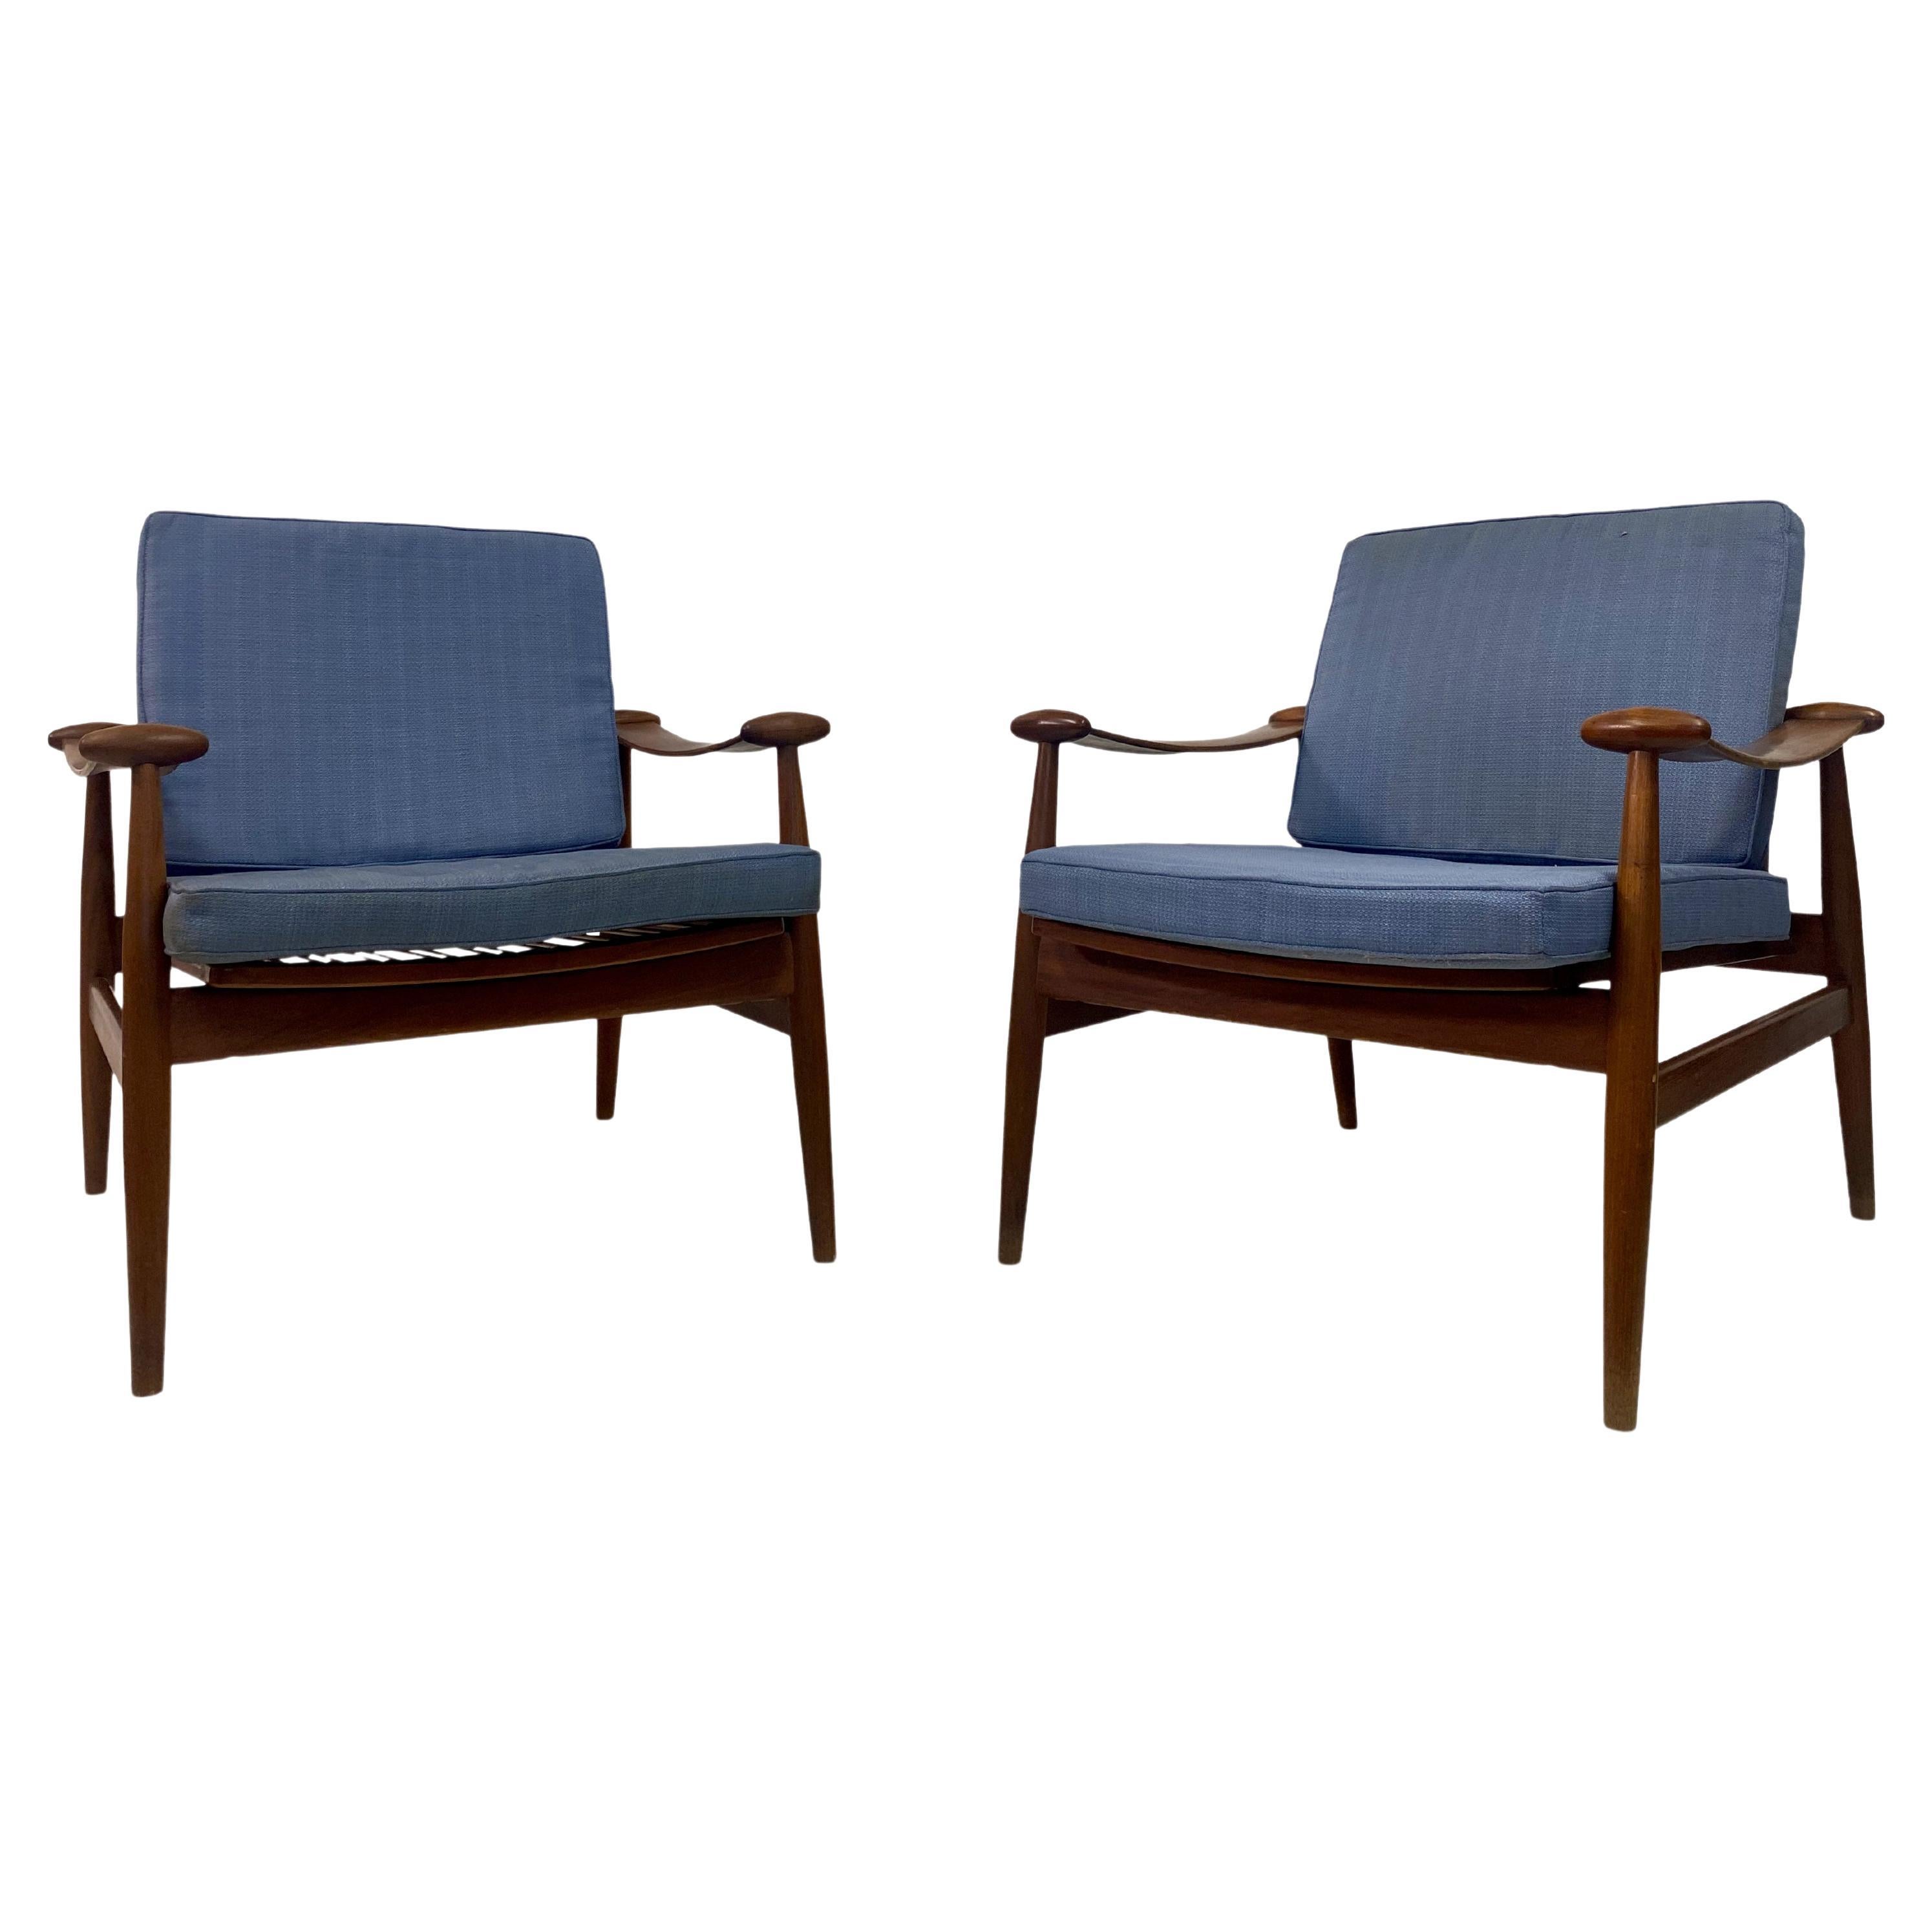 Pair Of  Early Spade Chairs In Teak By Finn Juhl For France And Daverkosen